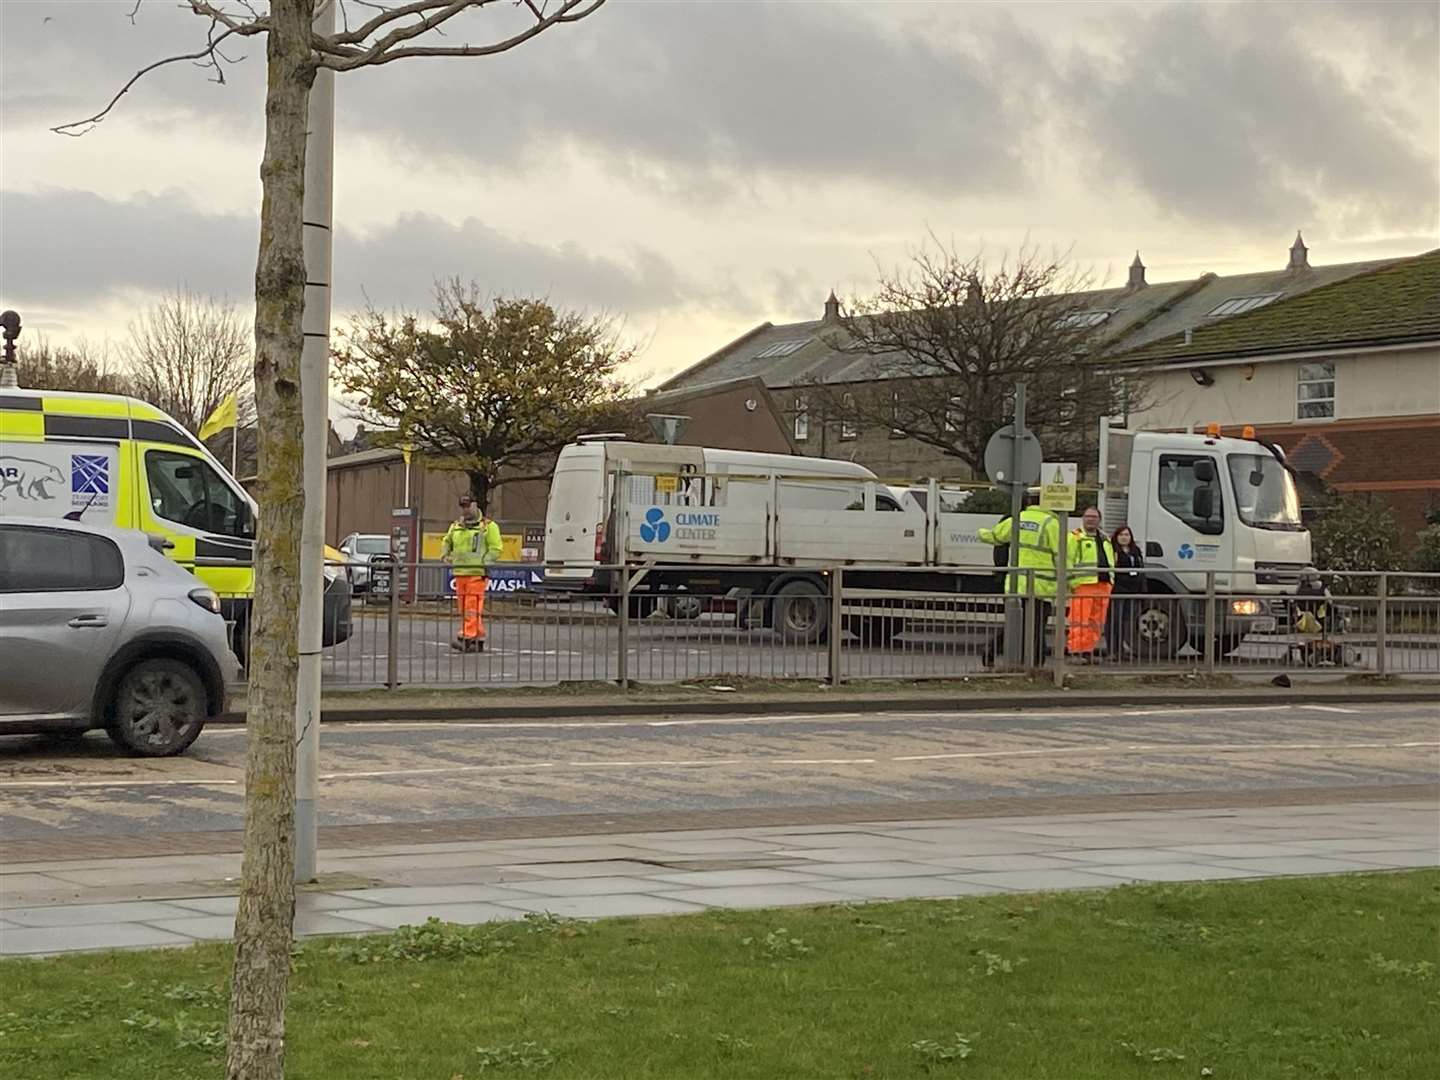 The scene of the collision between a truck and a mobility scooter in Inverness.